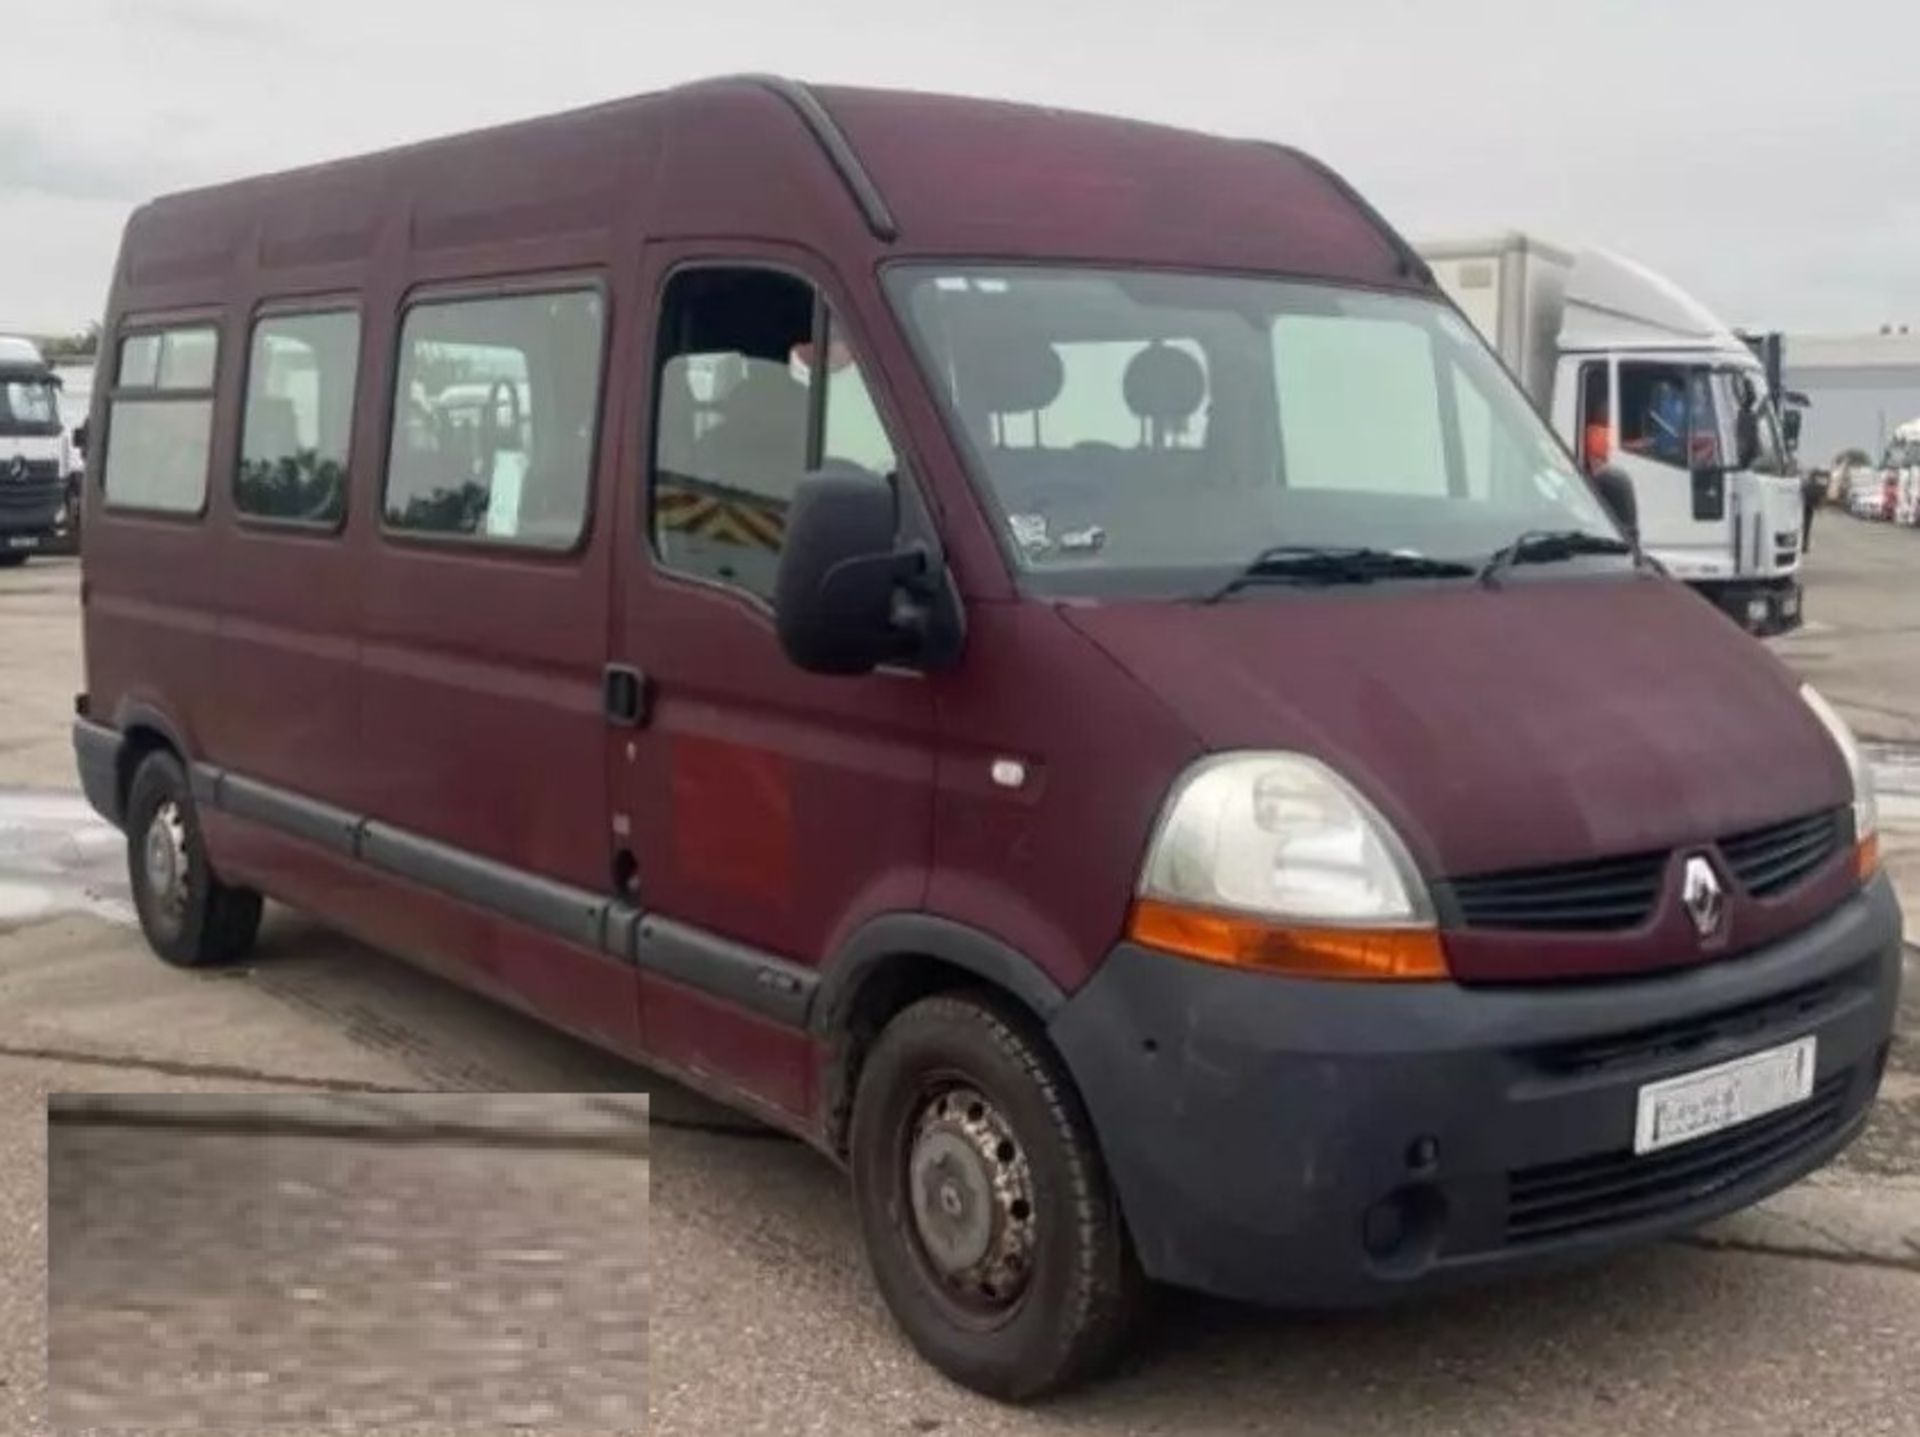 RELIABLE 2007 RENAULT MASTER LWB MINIBUS - IDEAL FOR RESTORATION OR CONVERSION (SPARES OR REPAIRS )